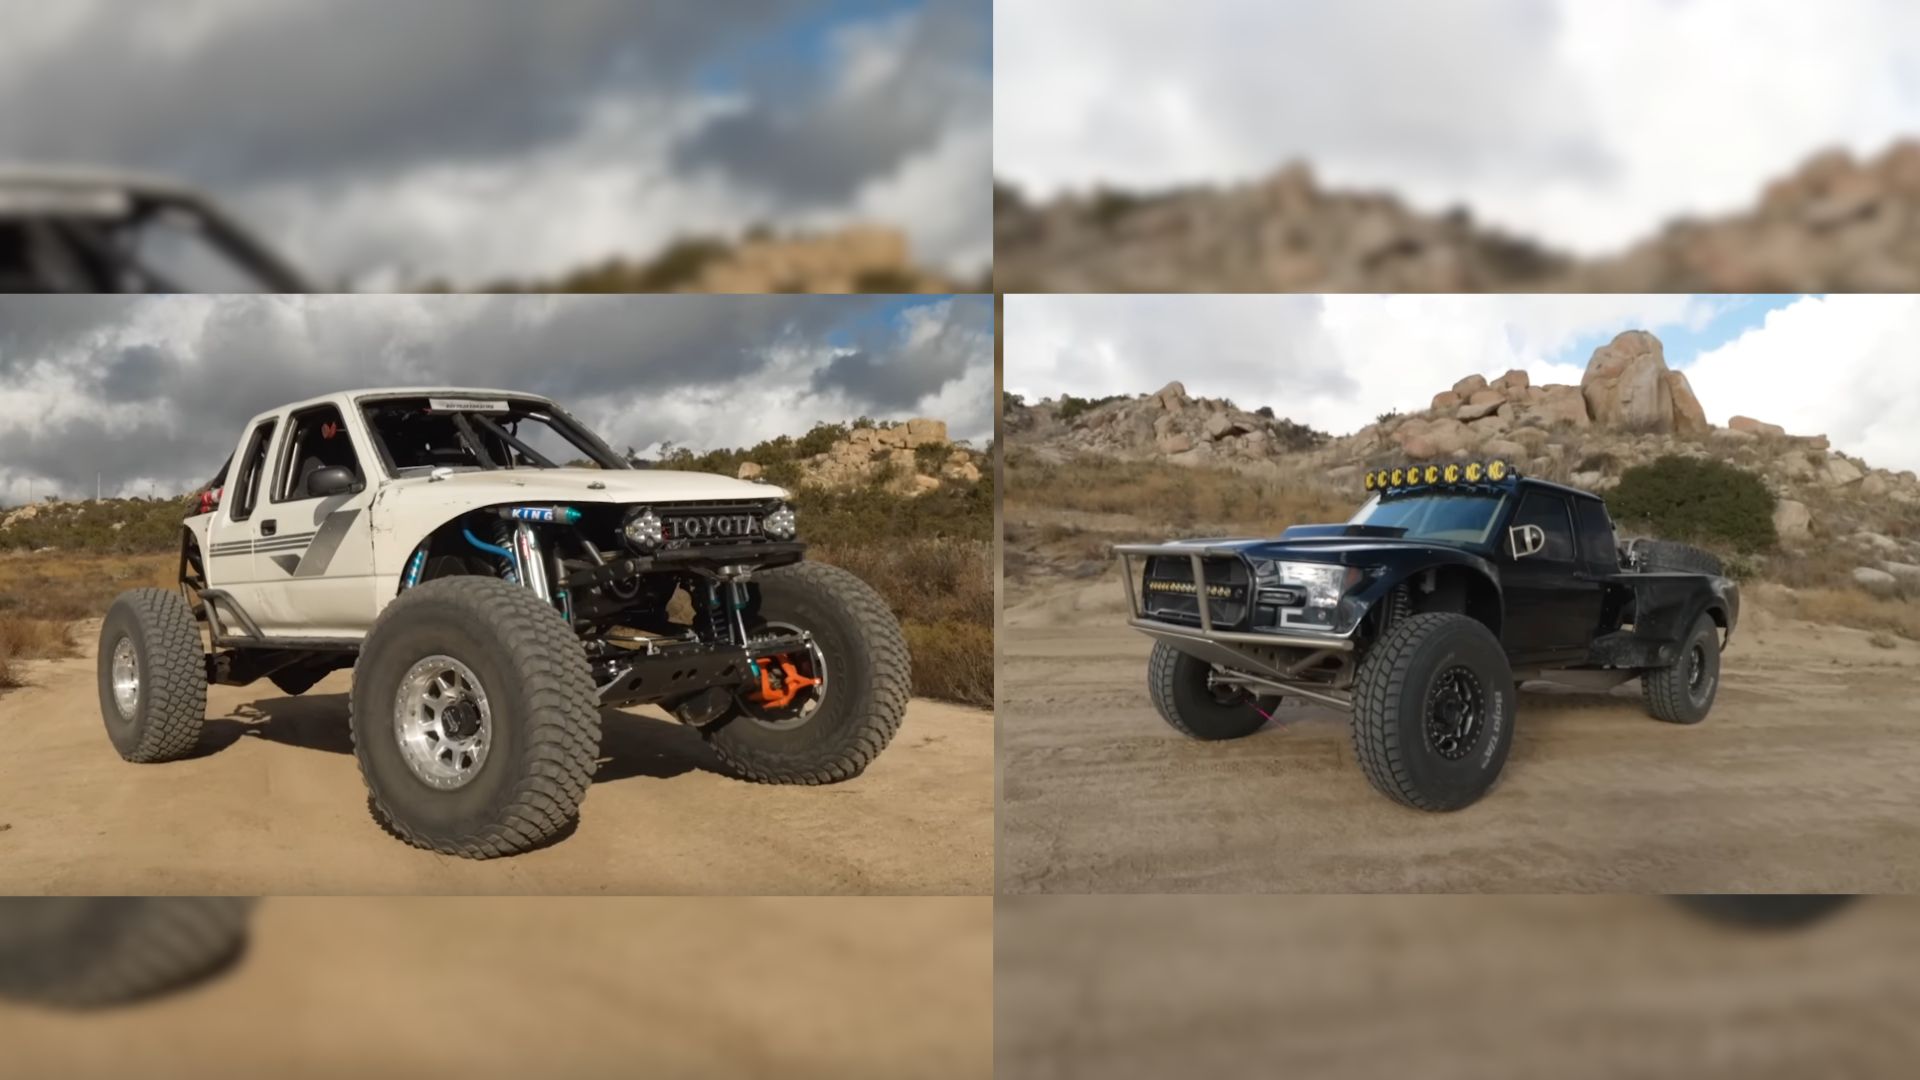 Watch Two Built Off-Road Trucks In A Nail-Biting Race